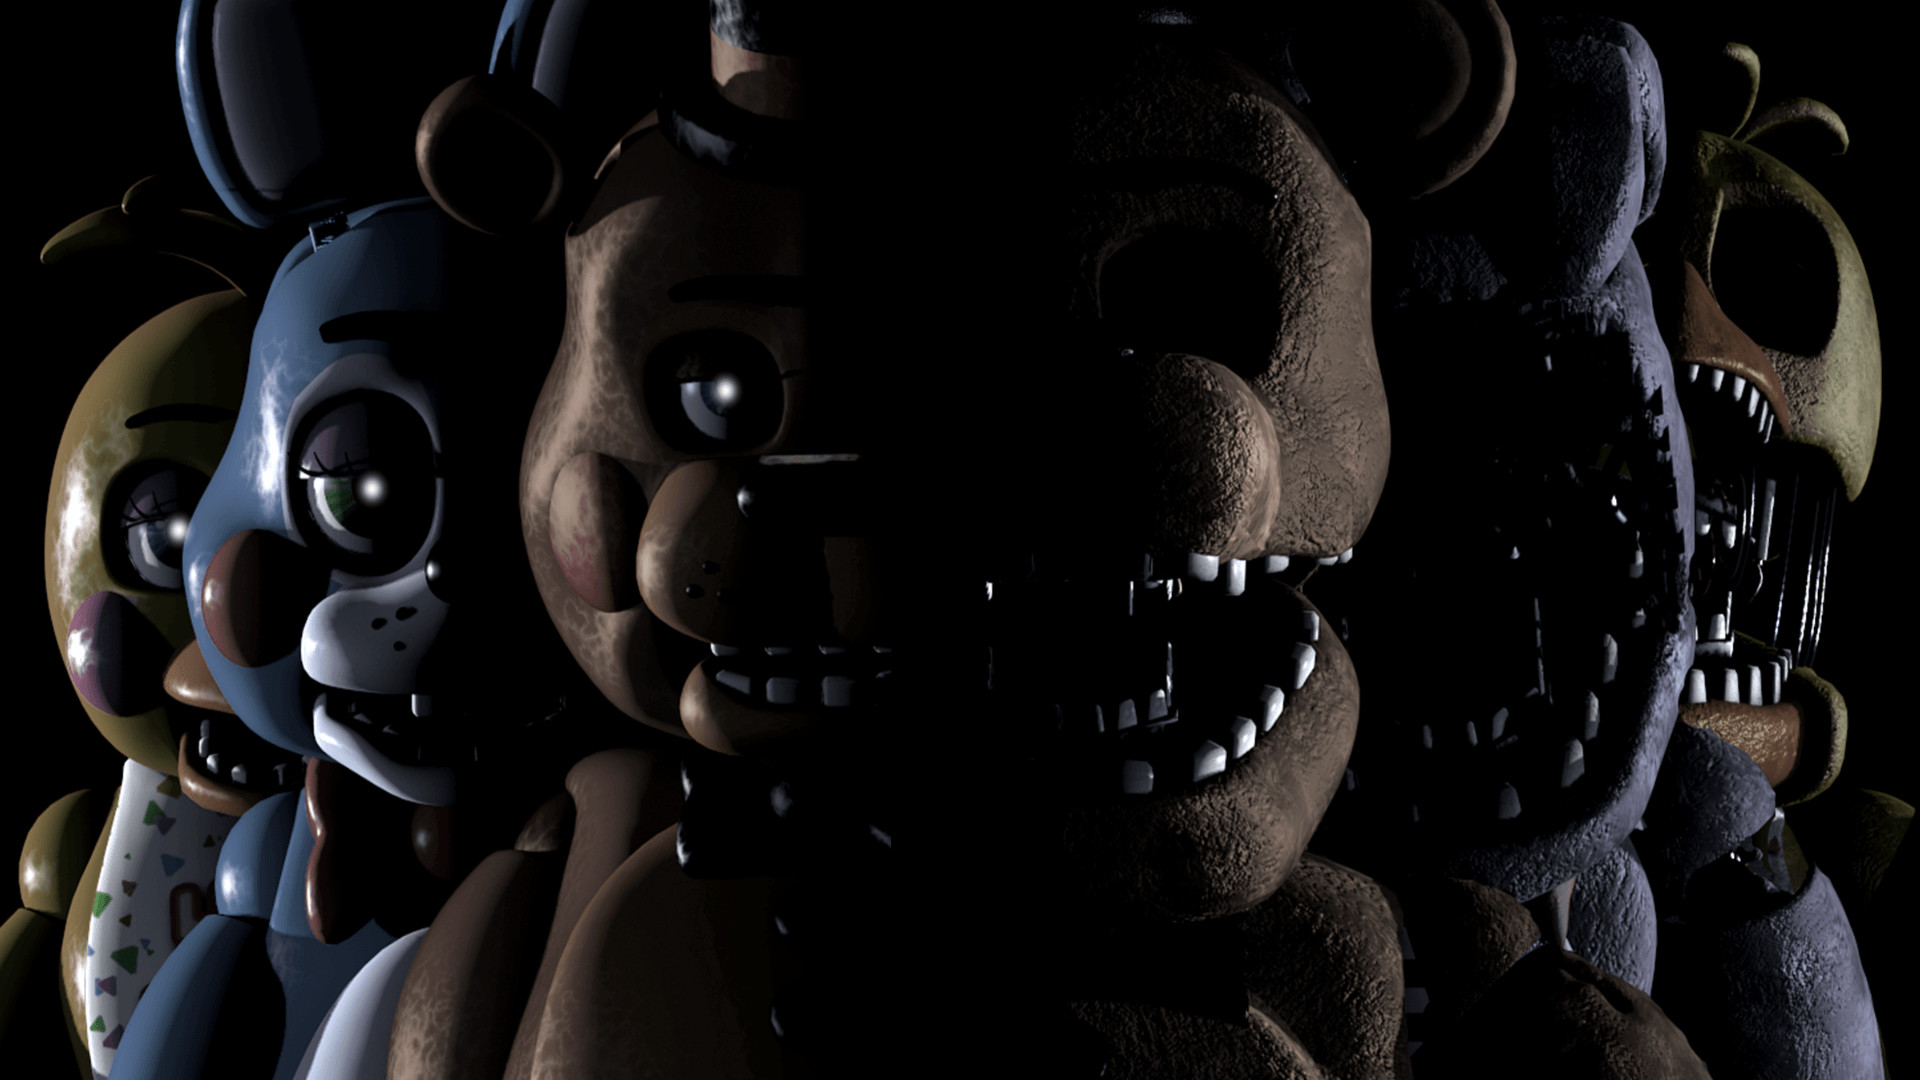 Five Nights at Freddys Wallpapers – Album on Imgur